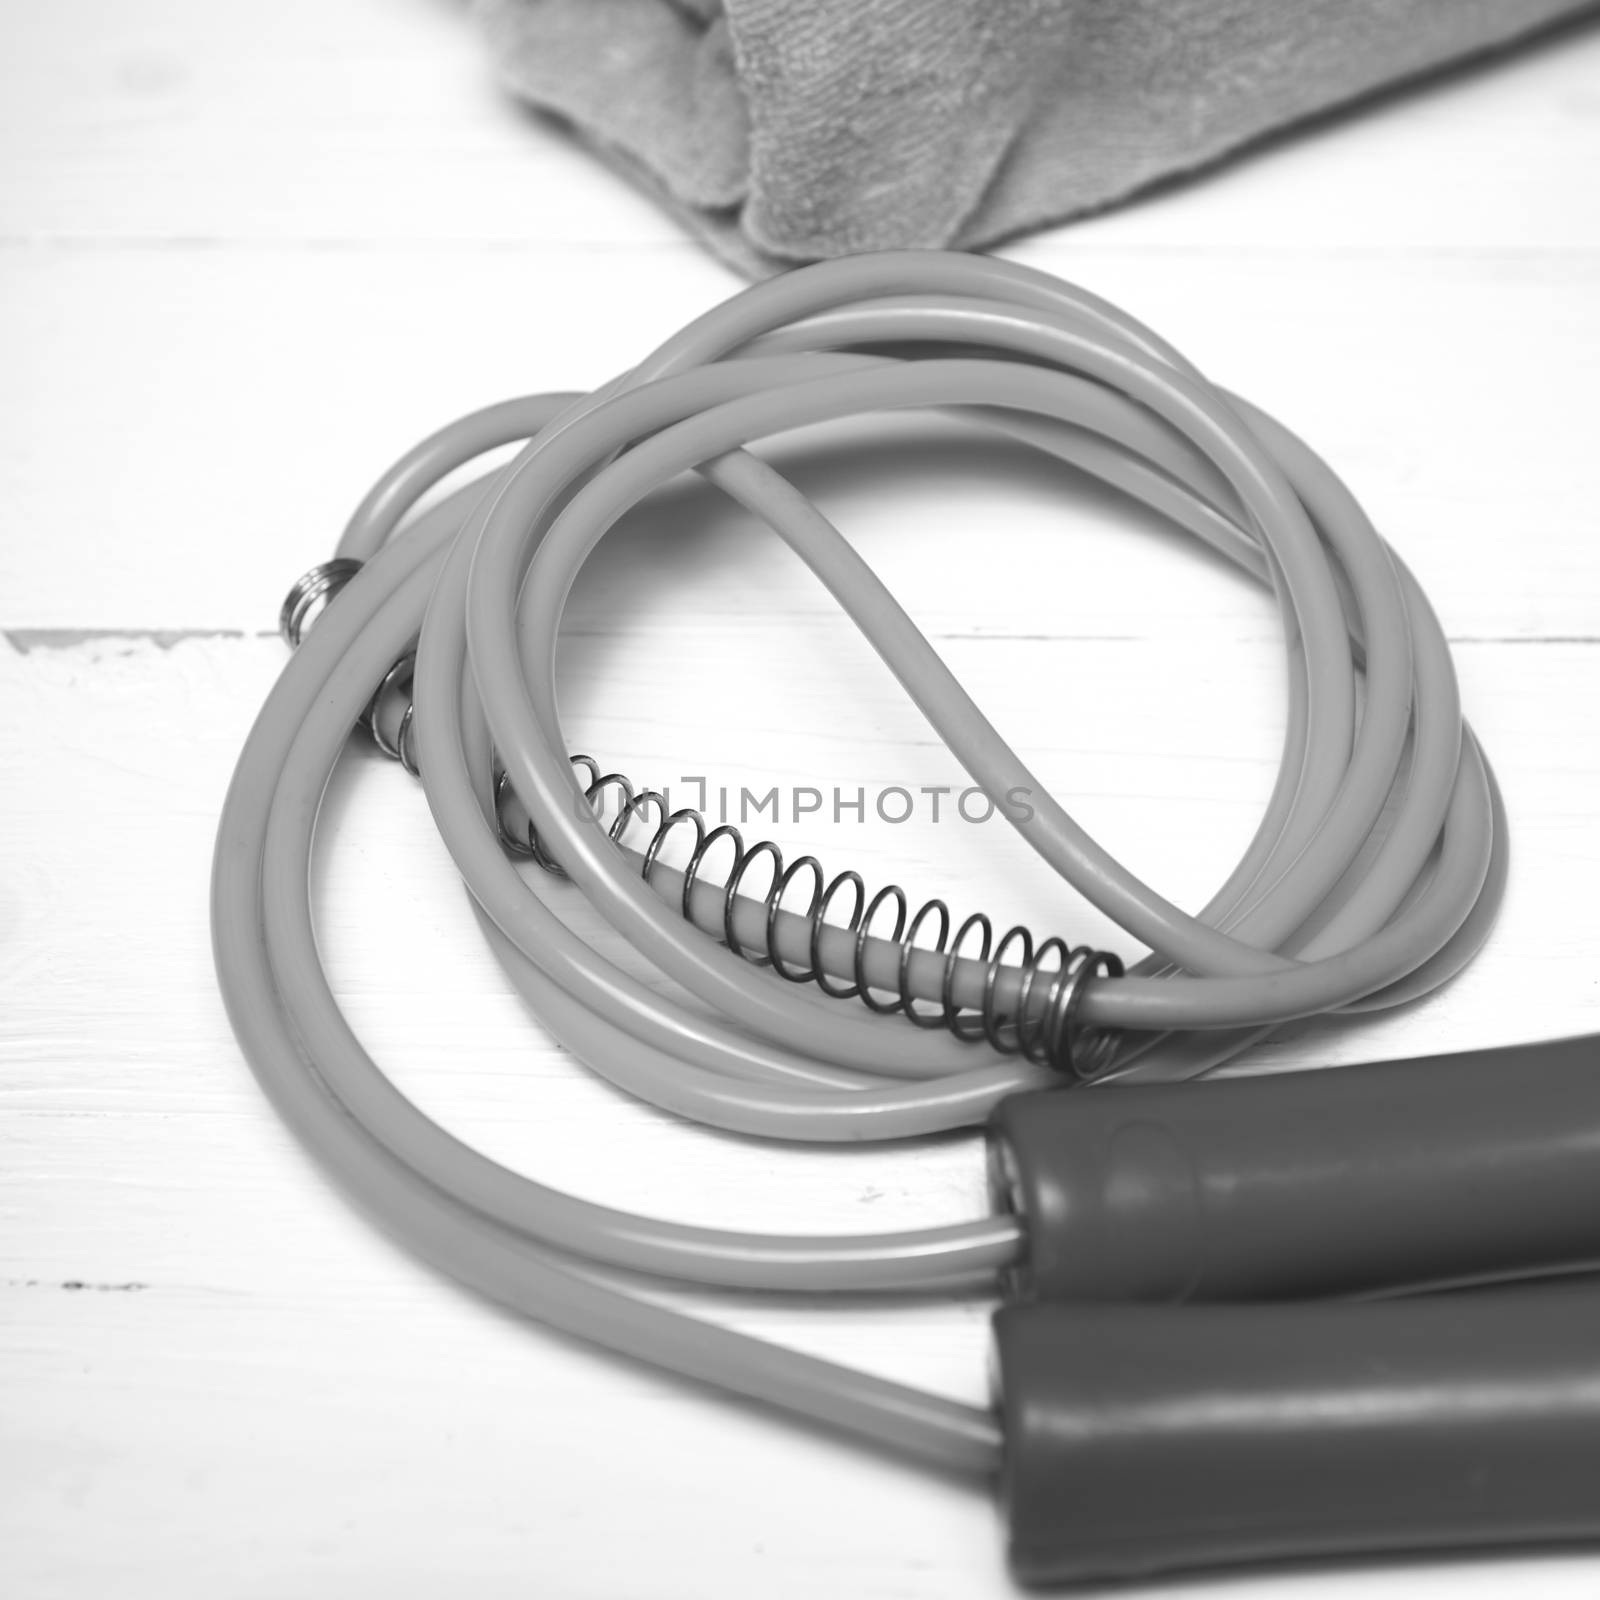 fitness equipment:towel,jumping rope on white wood table black and white color style